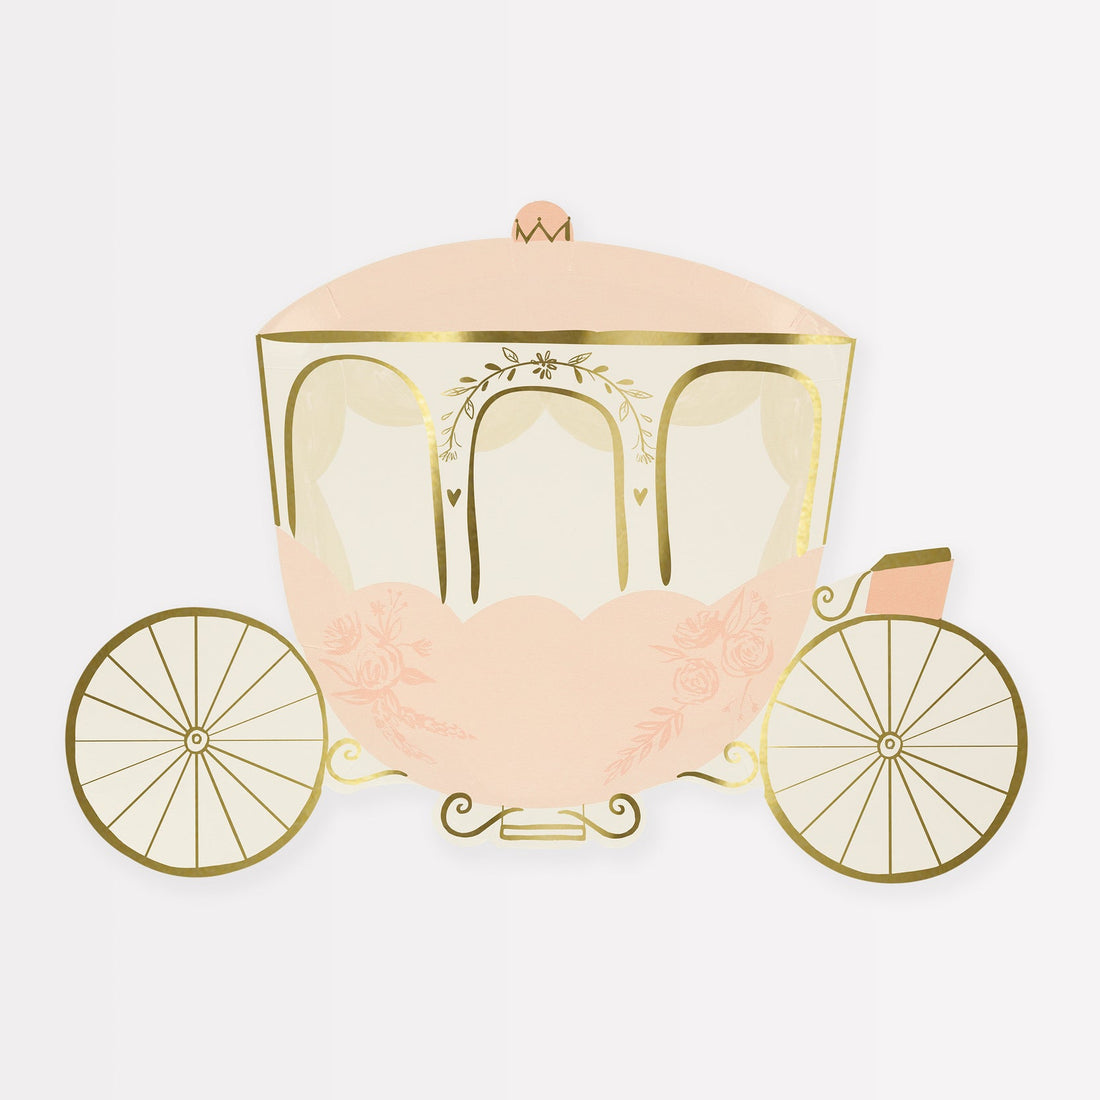 An illustrated pink and gold Princess Carriage Plates with floral and gold foil details on a white background, perfect for princess party plates made from sustainable FSC paper by Meri Meri.